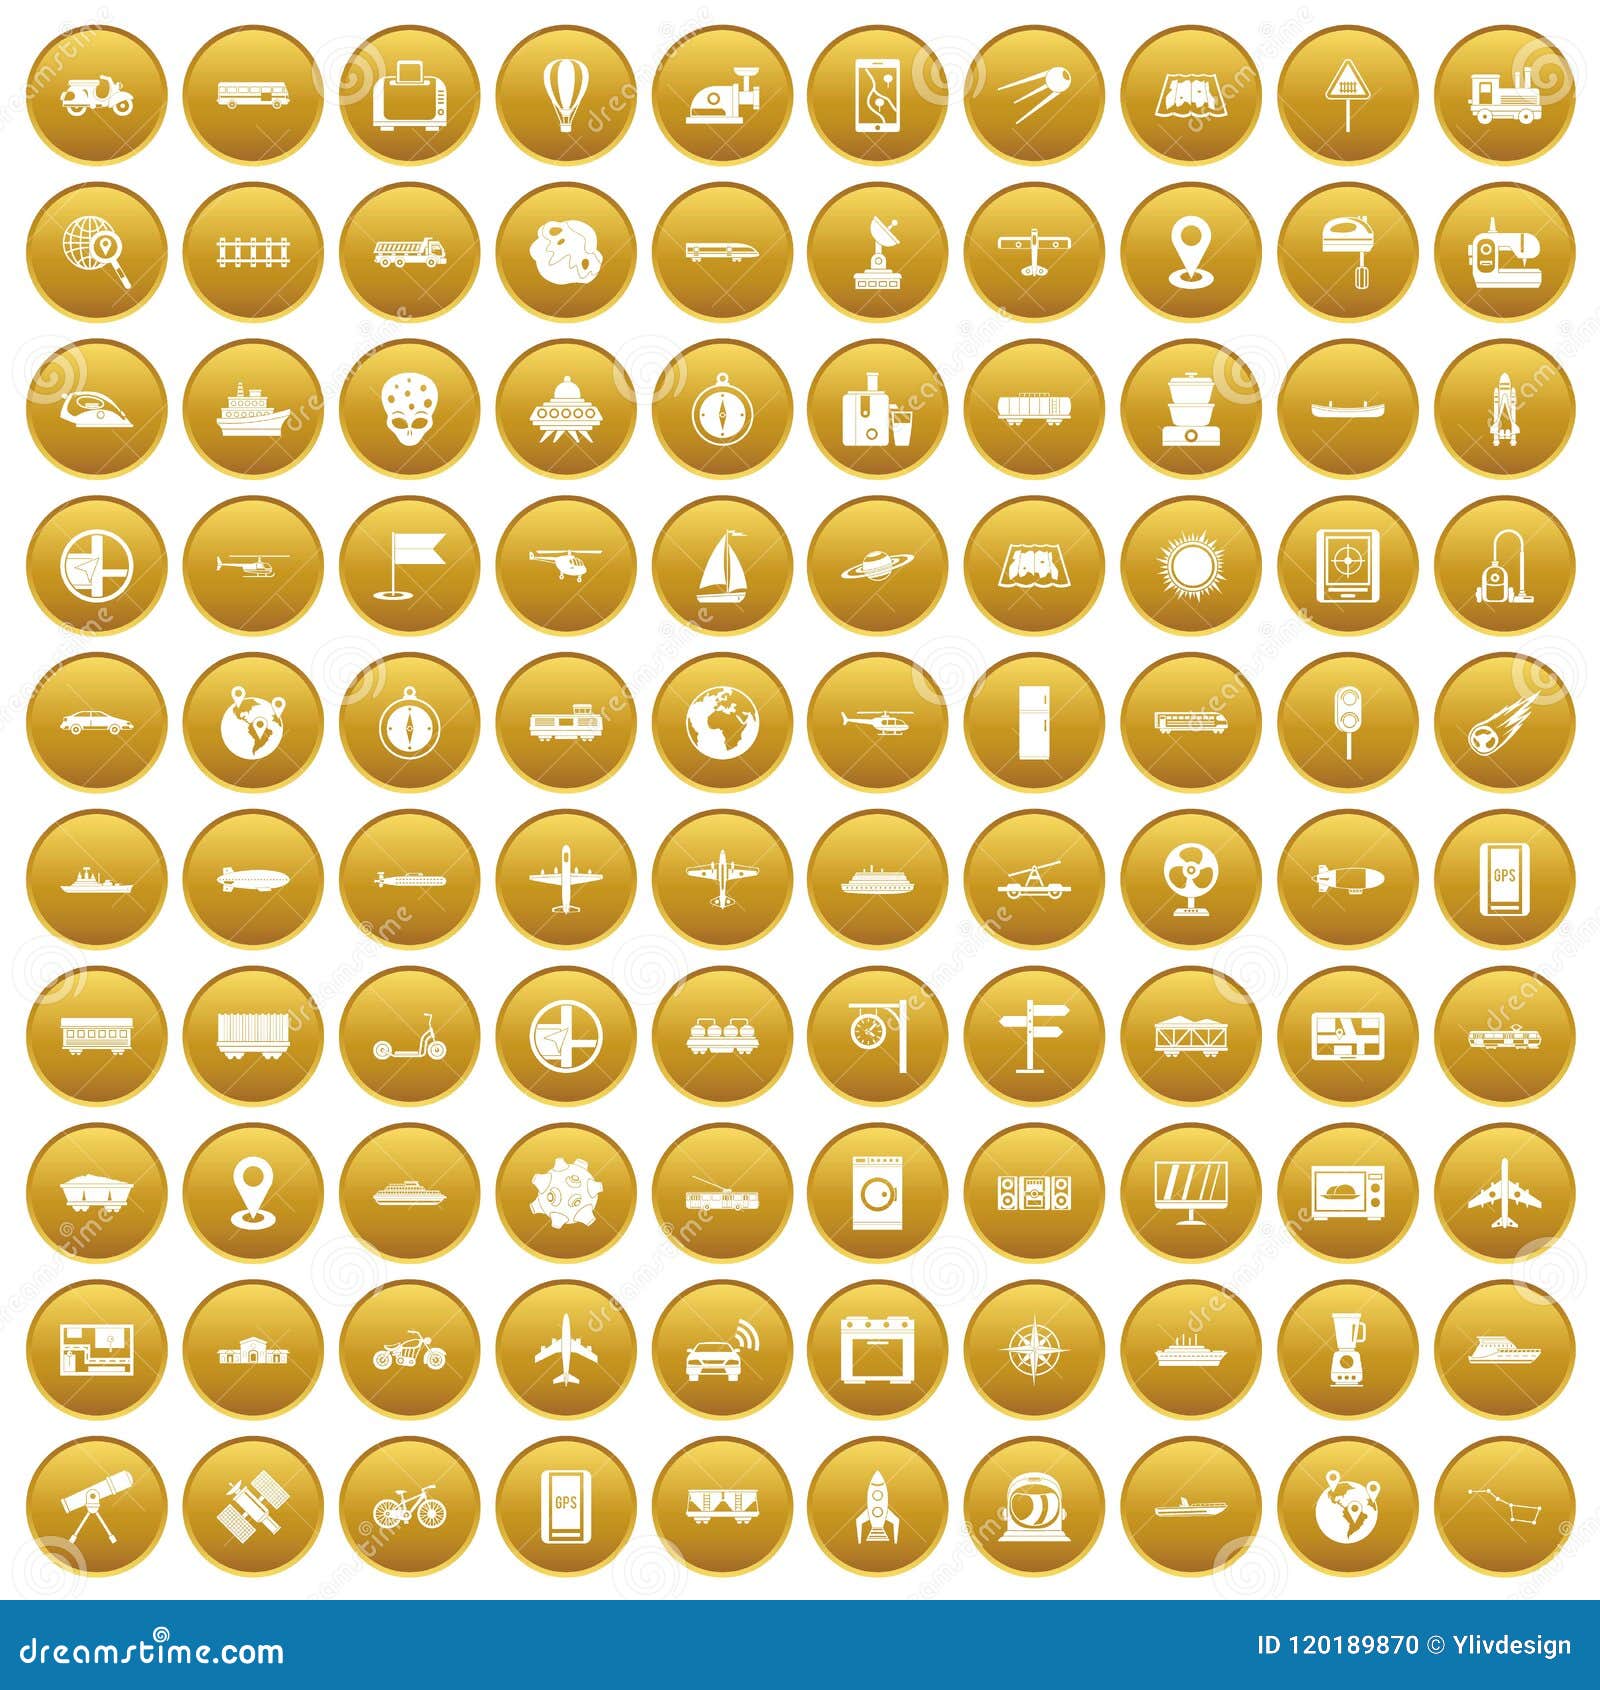 100 Technology Icons Set Gold Stock Vector - Illustration of collection ...